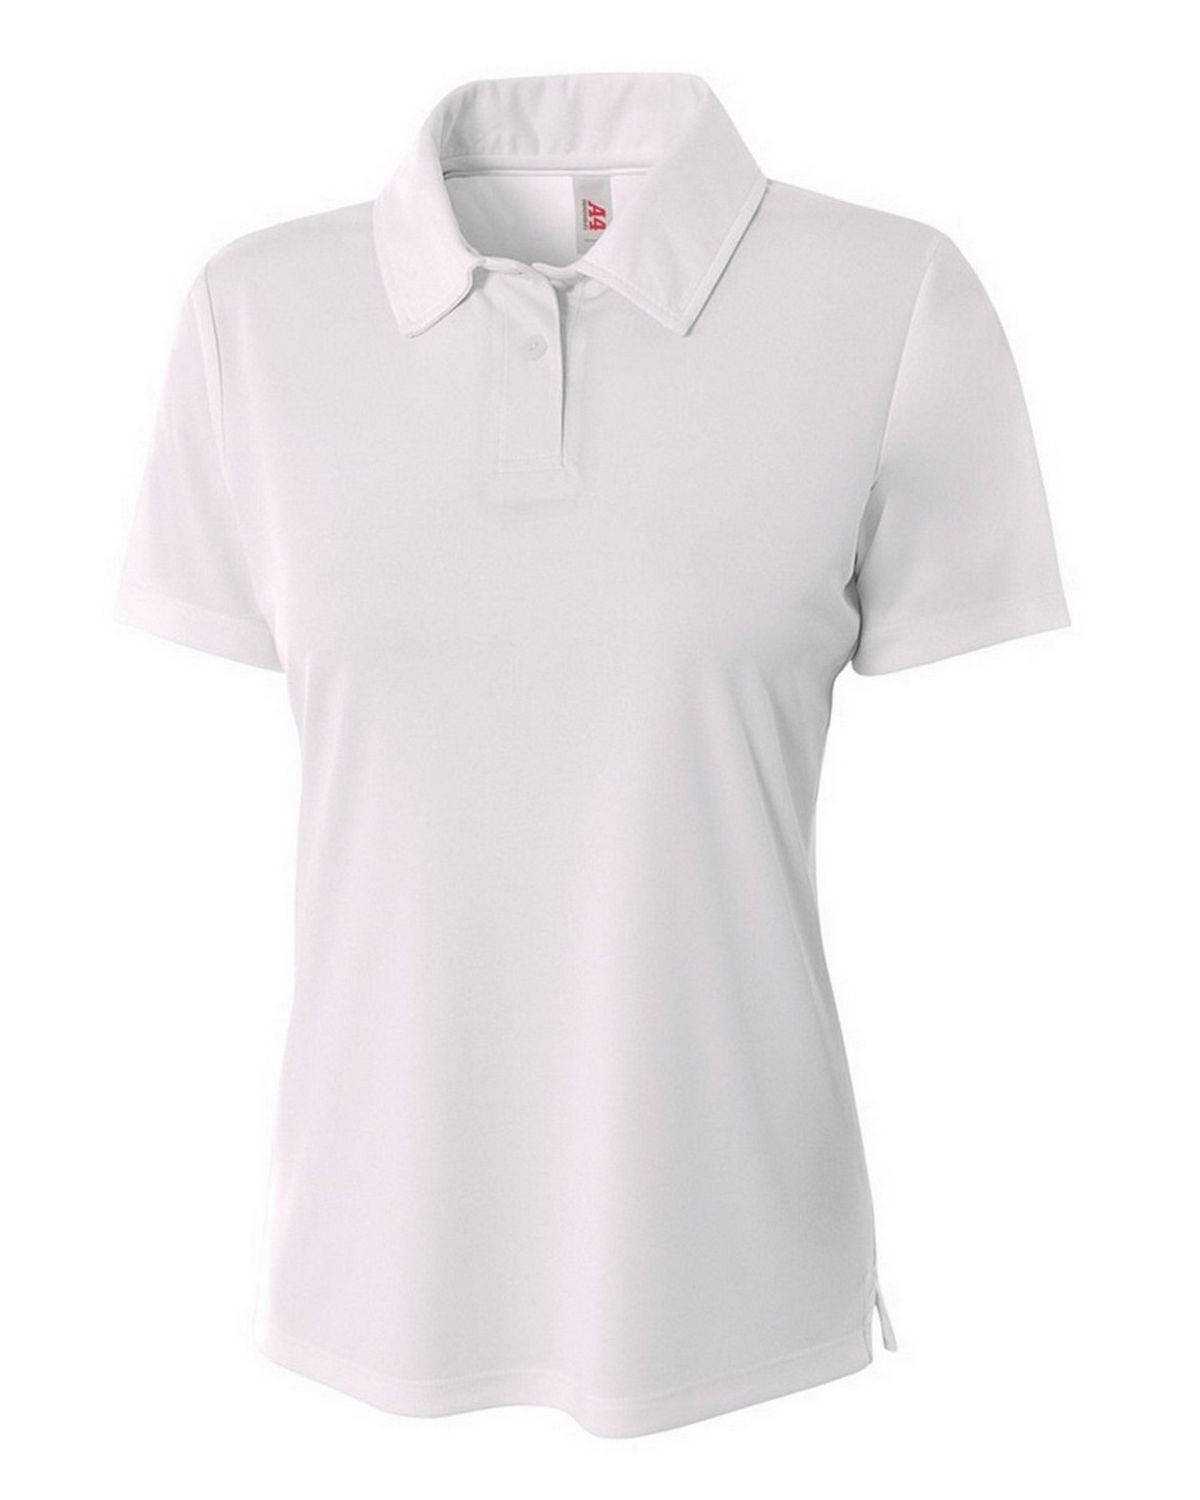 A4 NW3261 Ladies' Circular Knit Performance Polo